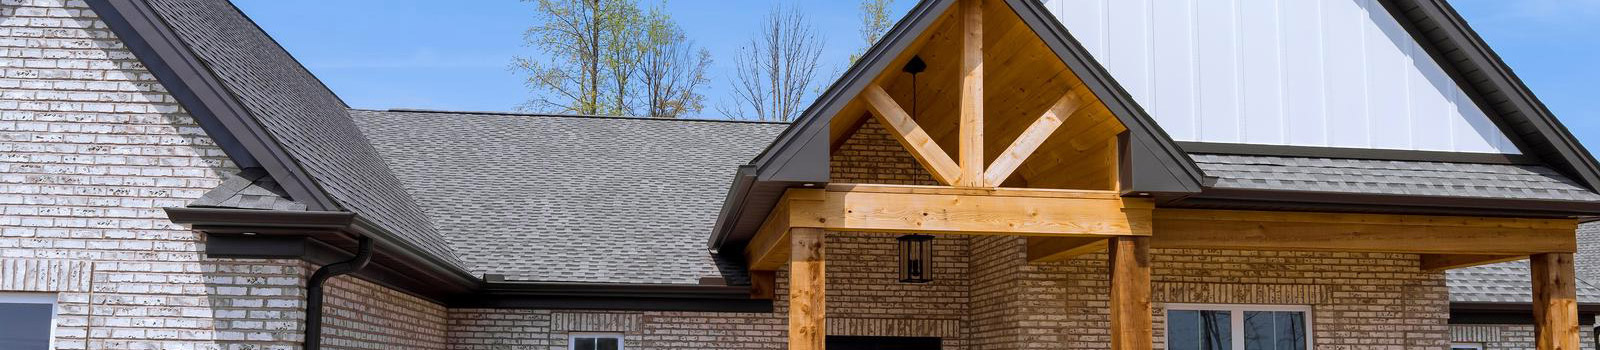 Idaho Roofing Companies - Finding the best Boise roofing company to repair or replace a Boise home roof.